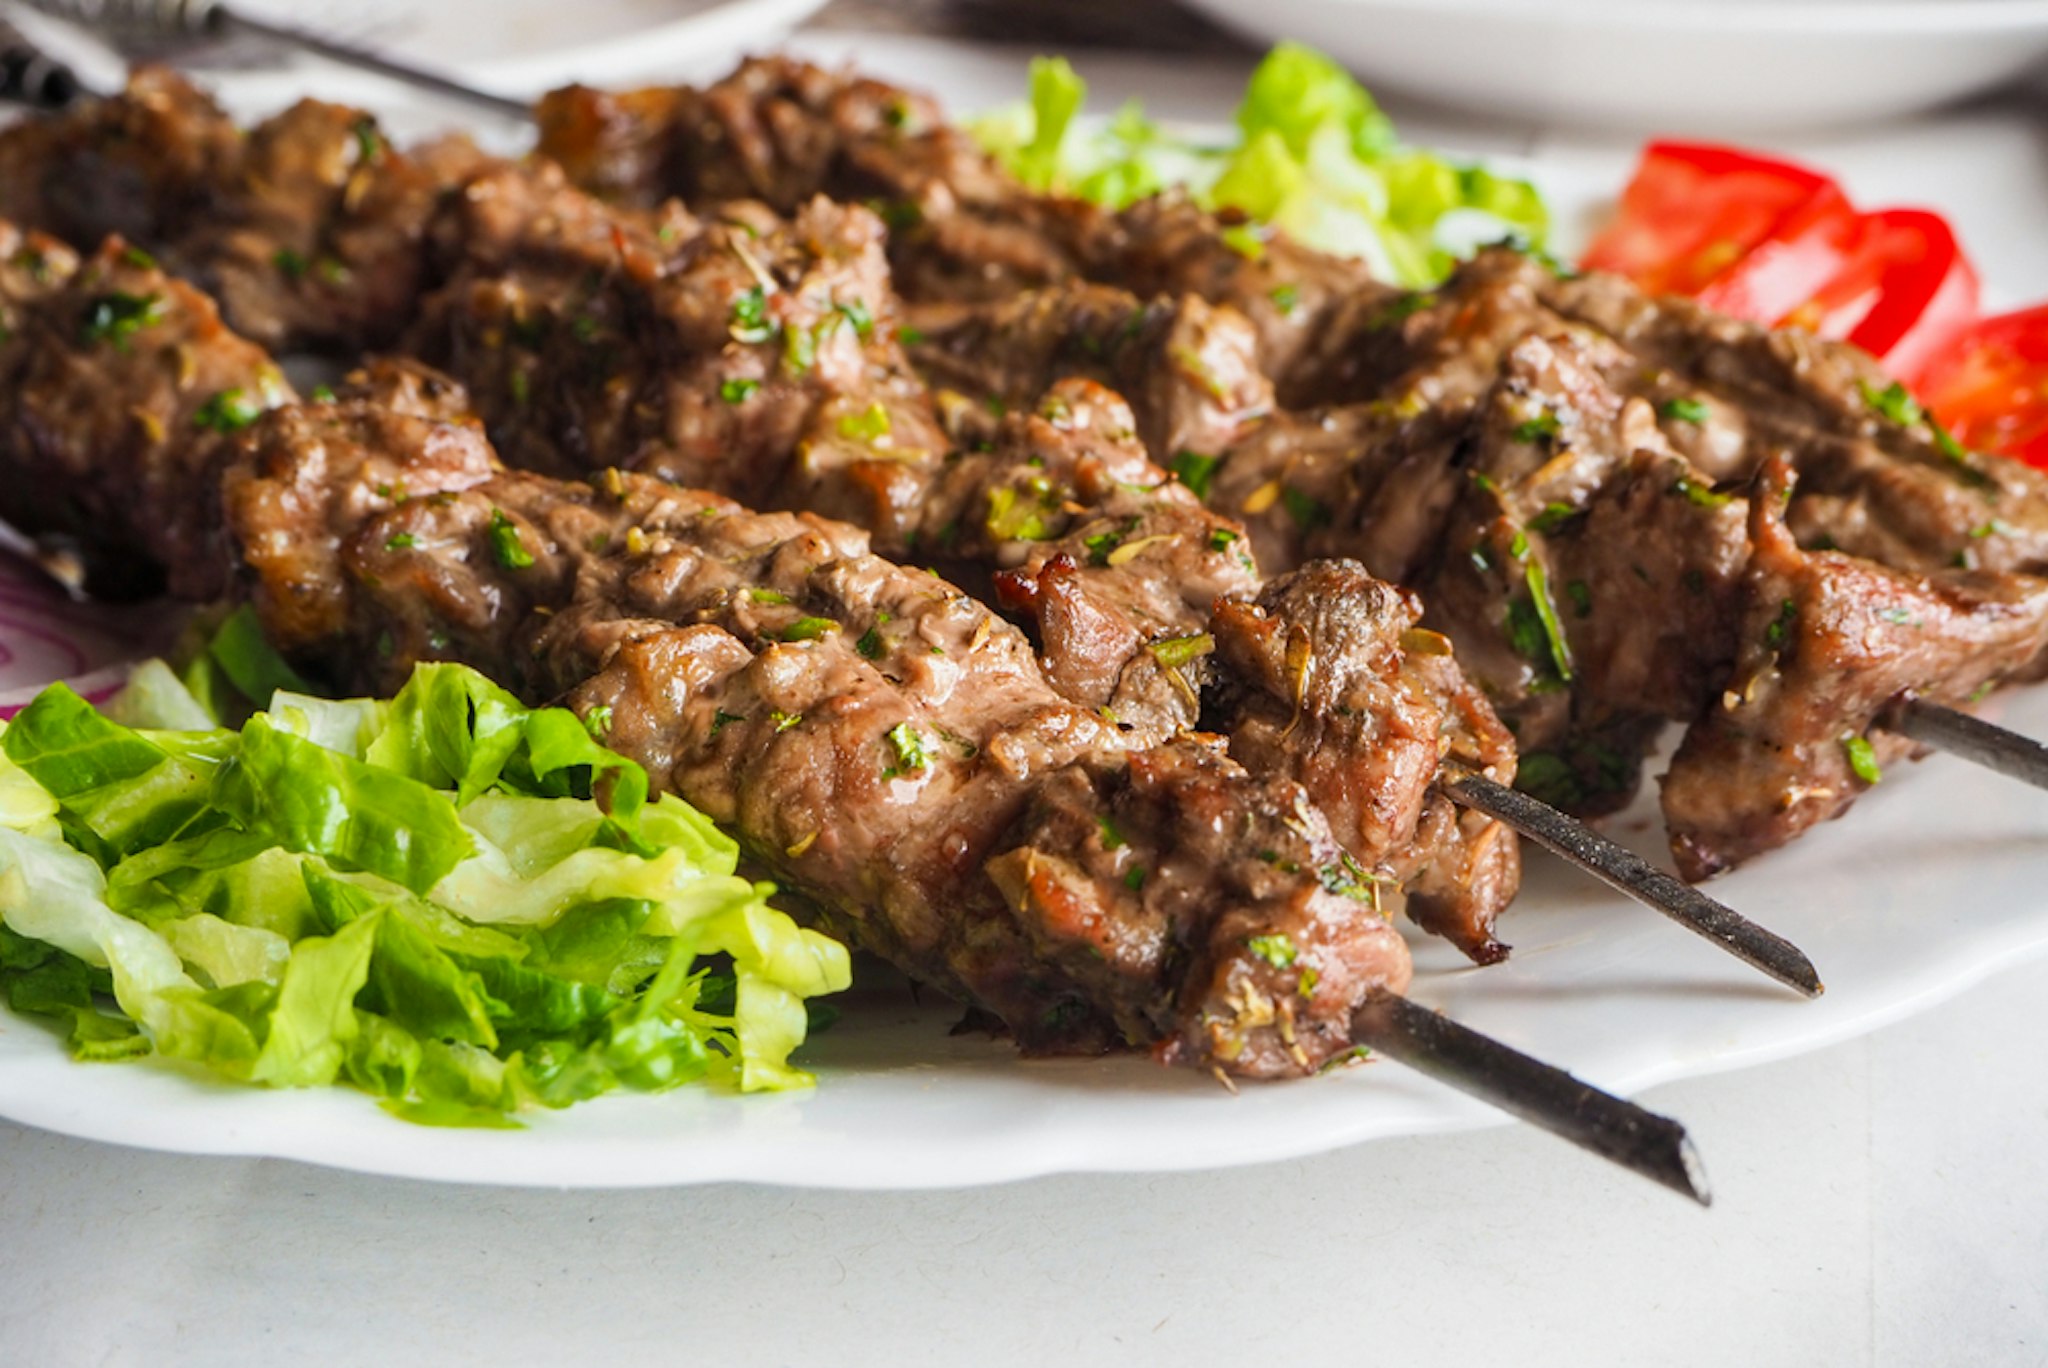 Traditional lamb kebab with salad in morocco